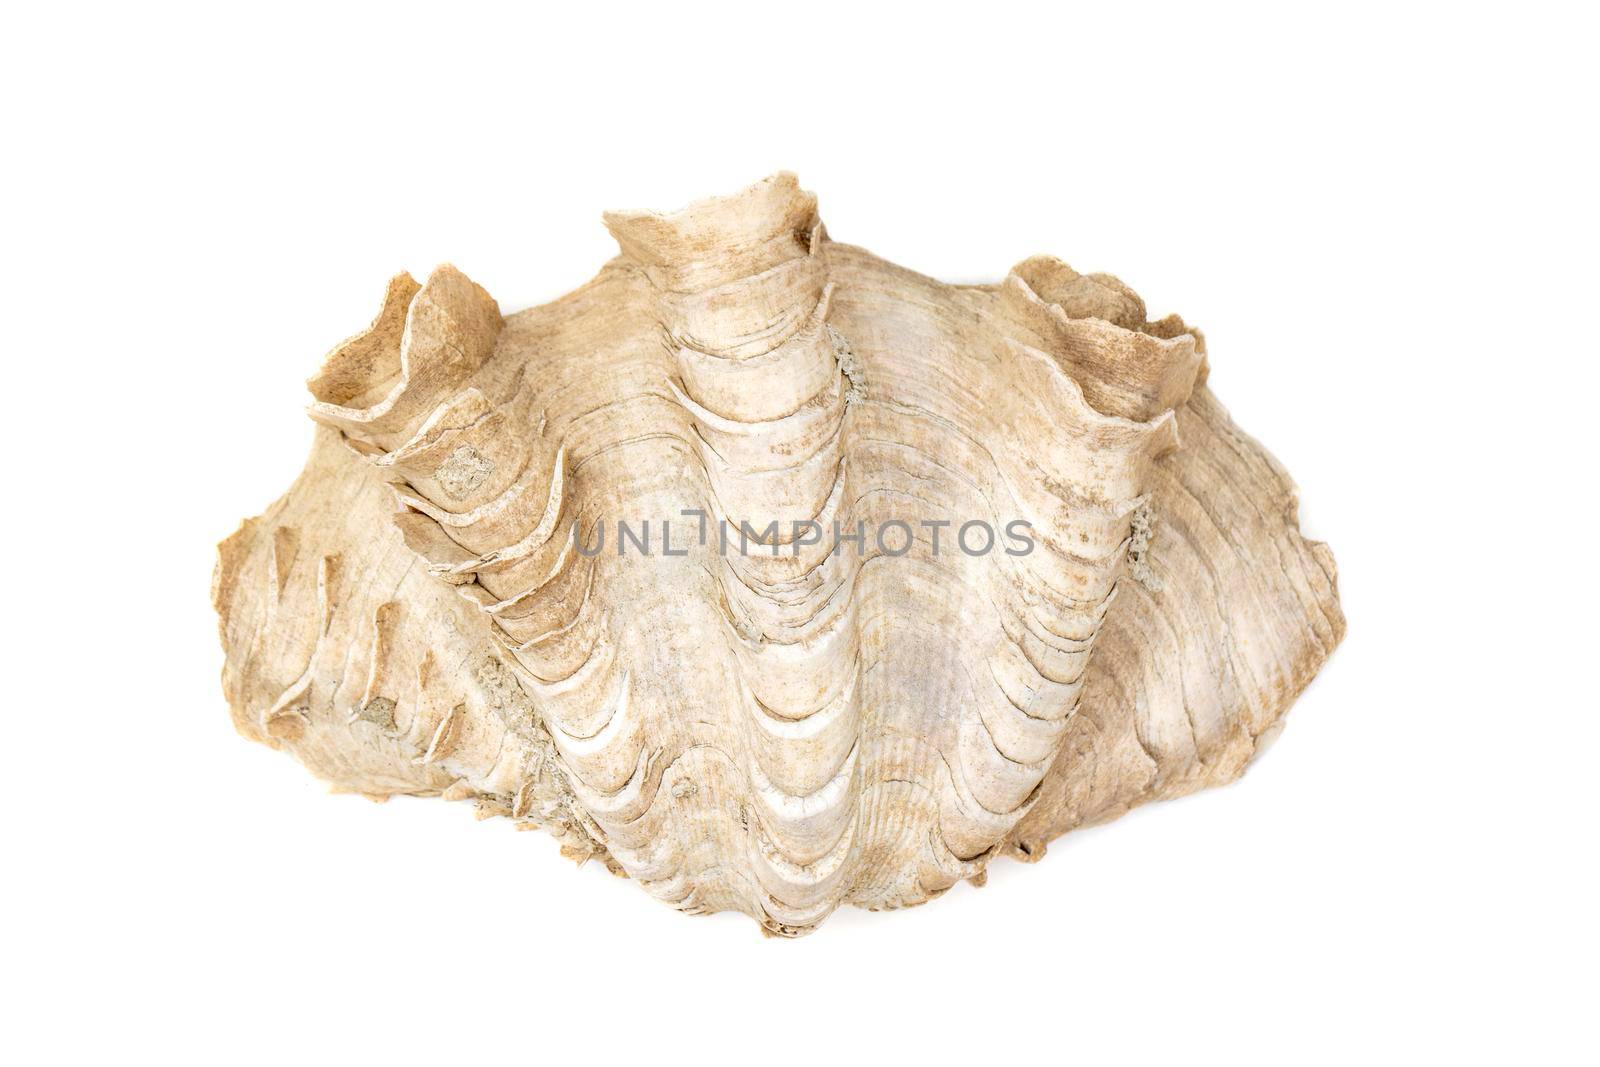 Image of Crocus Giant Clam (Tridacna crocea). on a white background. Sea shells. Undersea Animals. by yod67